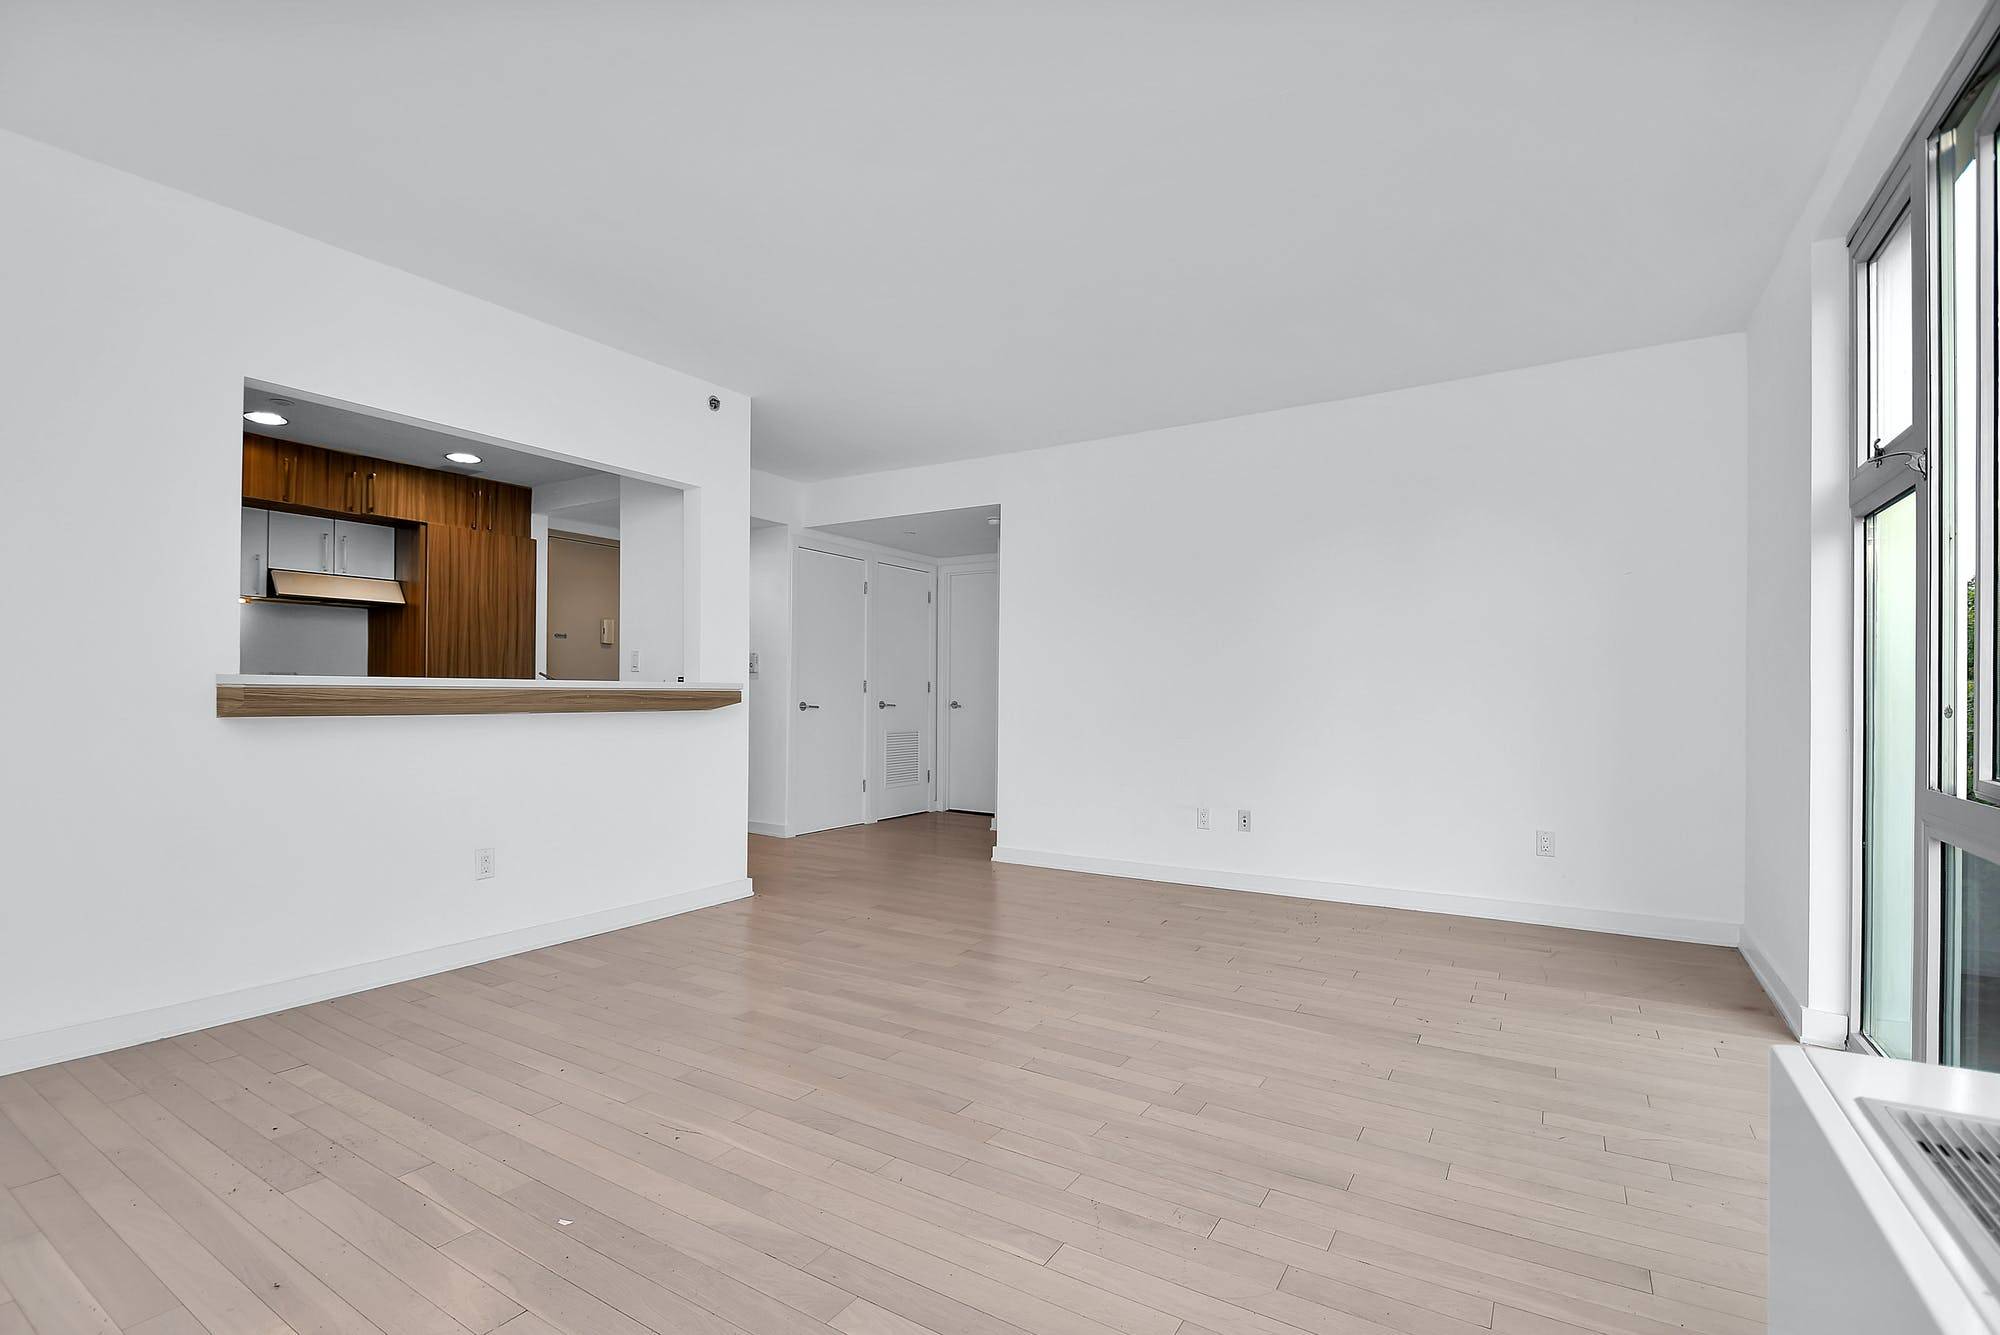 One Month Free 3300 net, 3600 gross Welcome to The Williamsburg Social Truly in heart of Williamsburg, Brooklyn Williamsburg Social offers luxury living at its best.